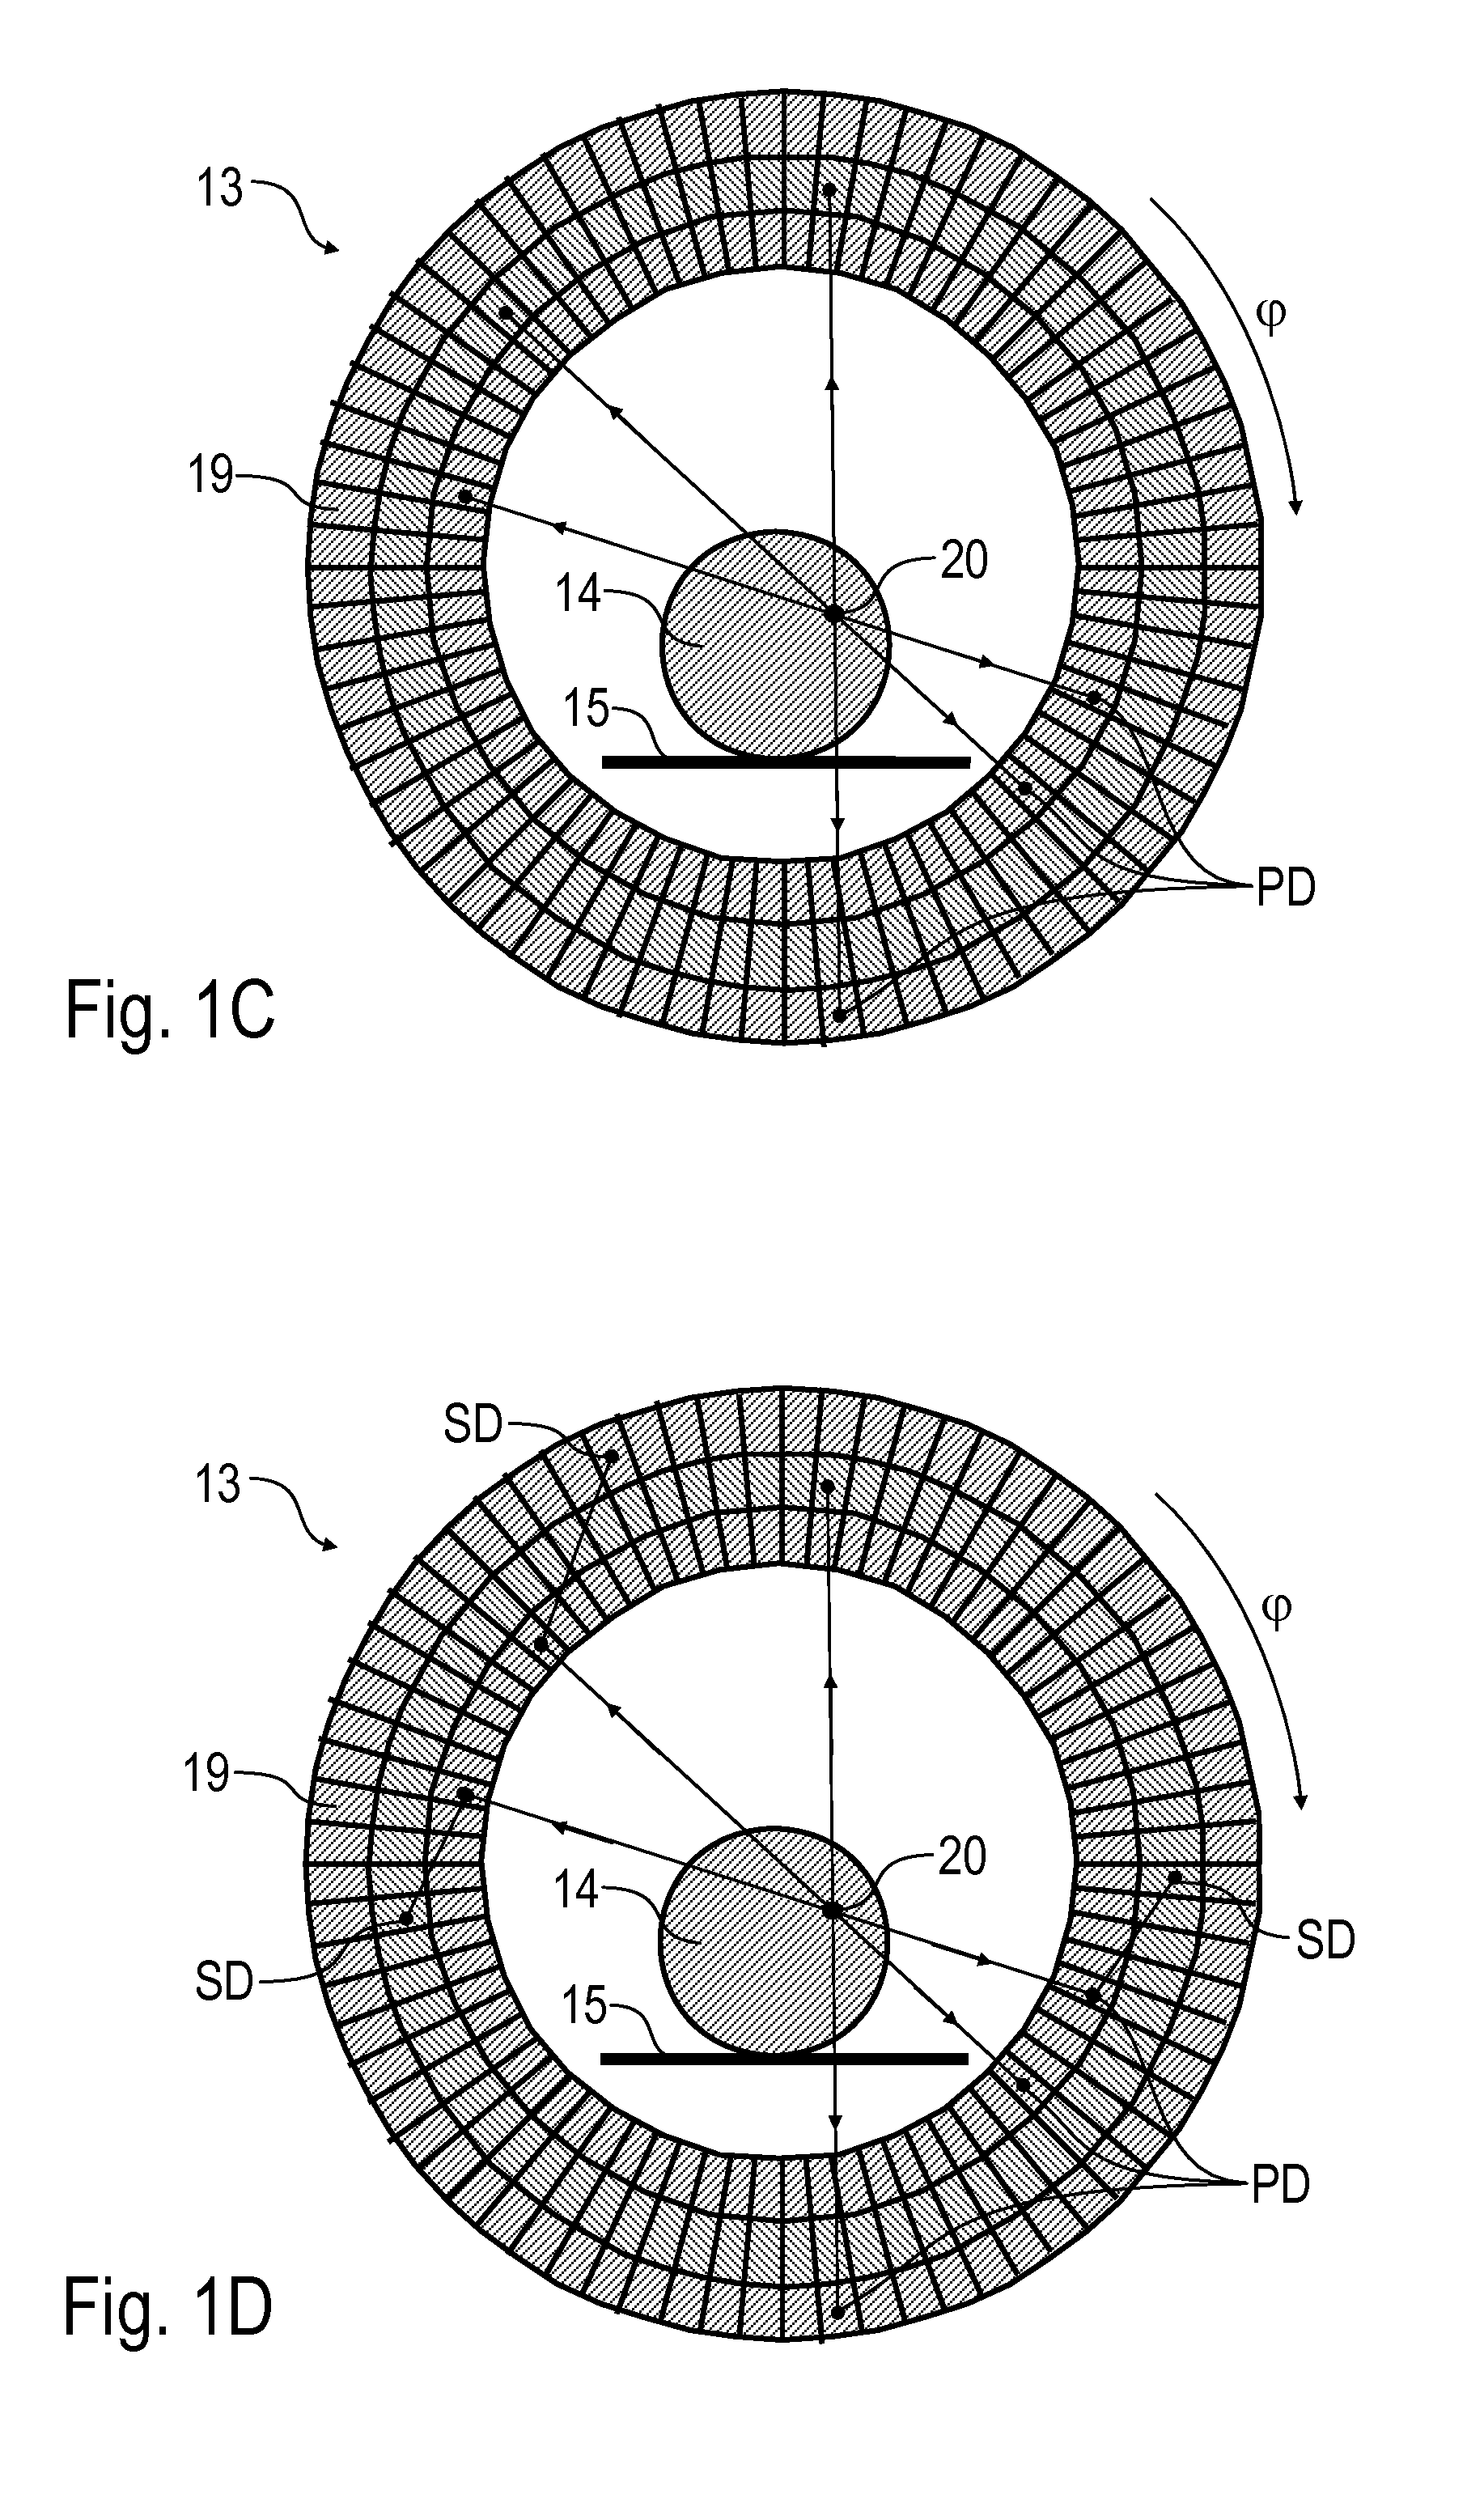 Detector arrangement for a tomographic imaging apparatus, particularly for a positron emission tomograph